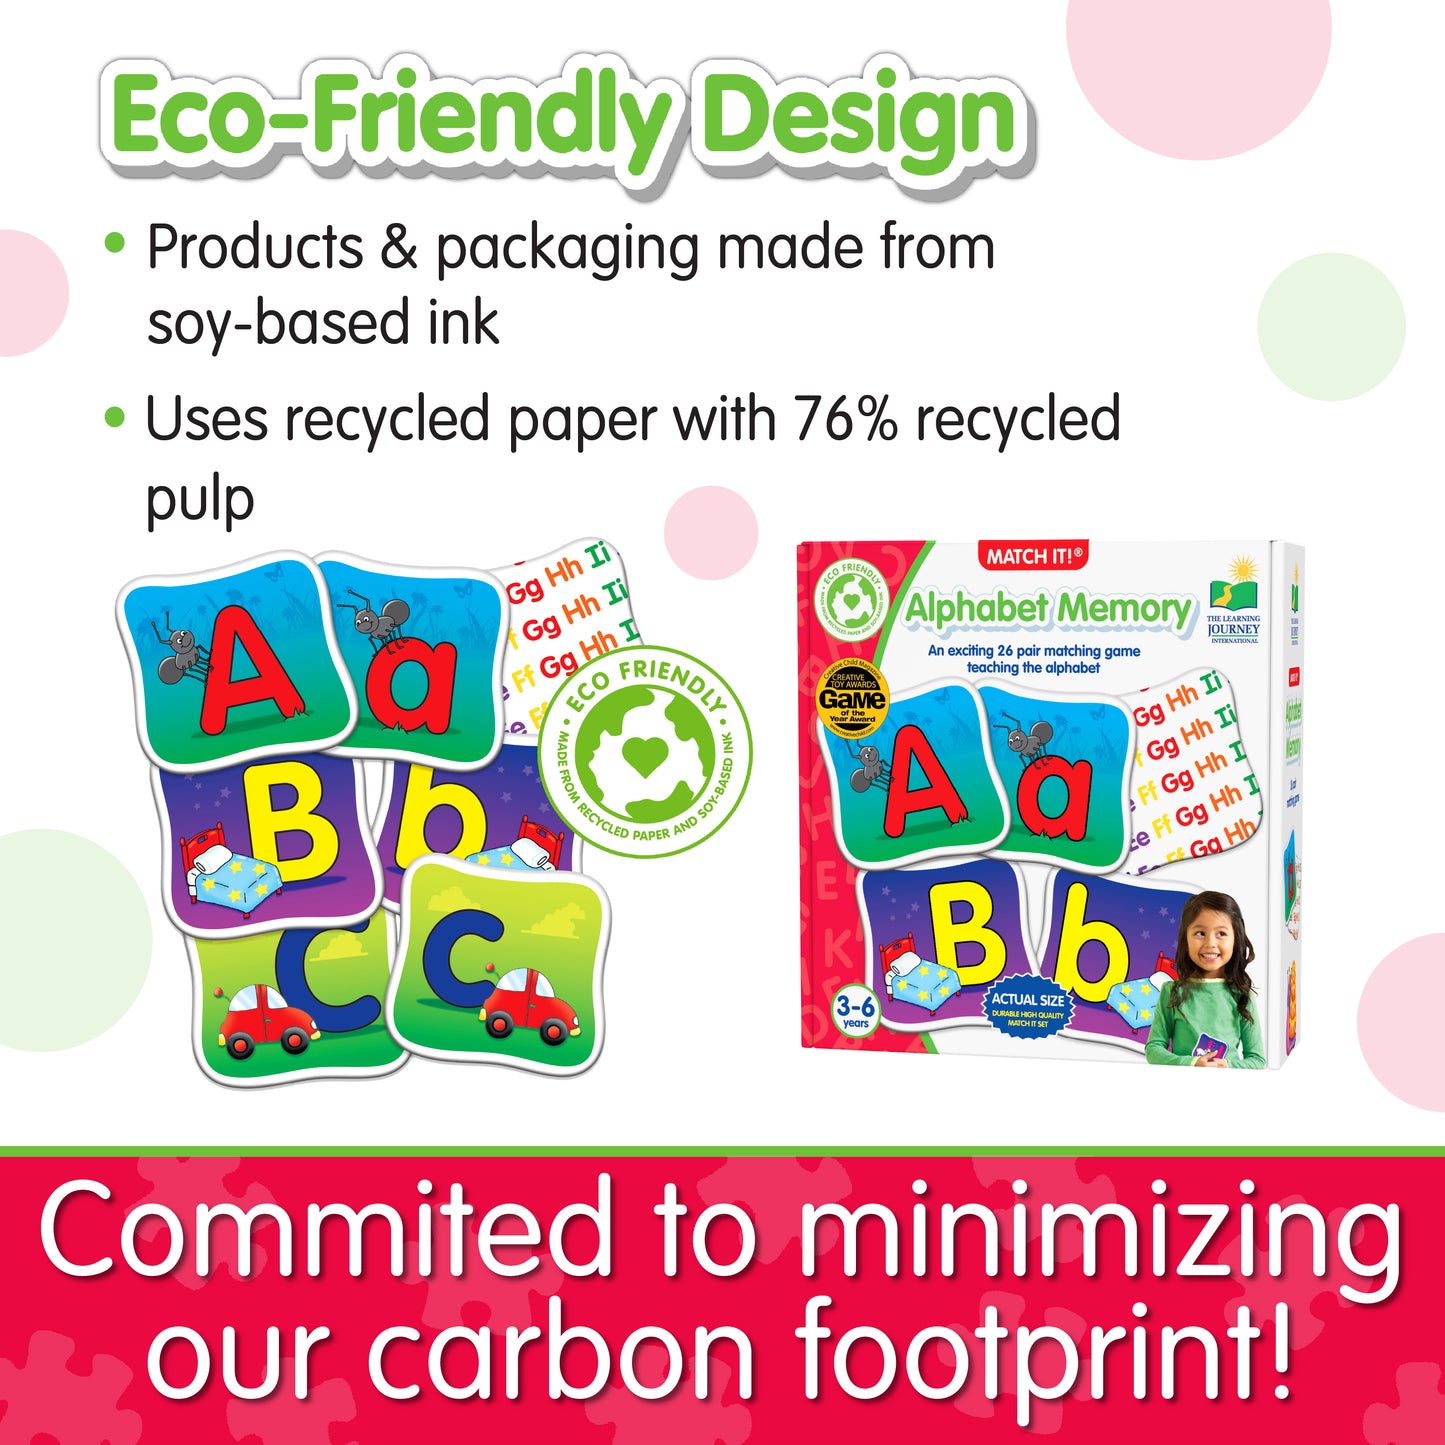 Infographic about Match It - Alphabet Memory's eco-friendly design that says, "Committed to minimizing our carbon footprint!"